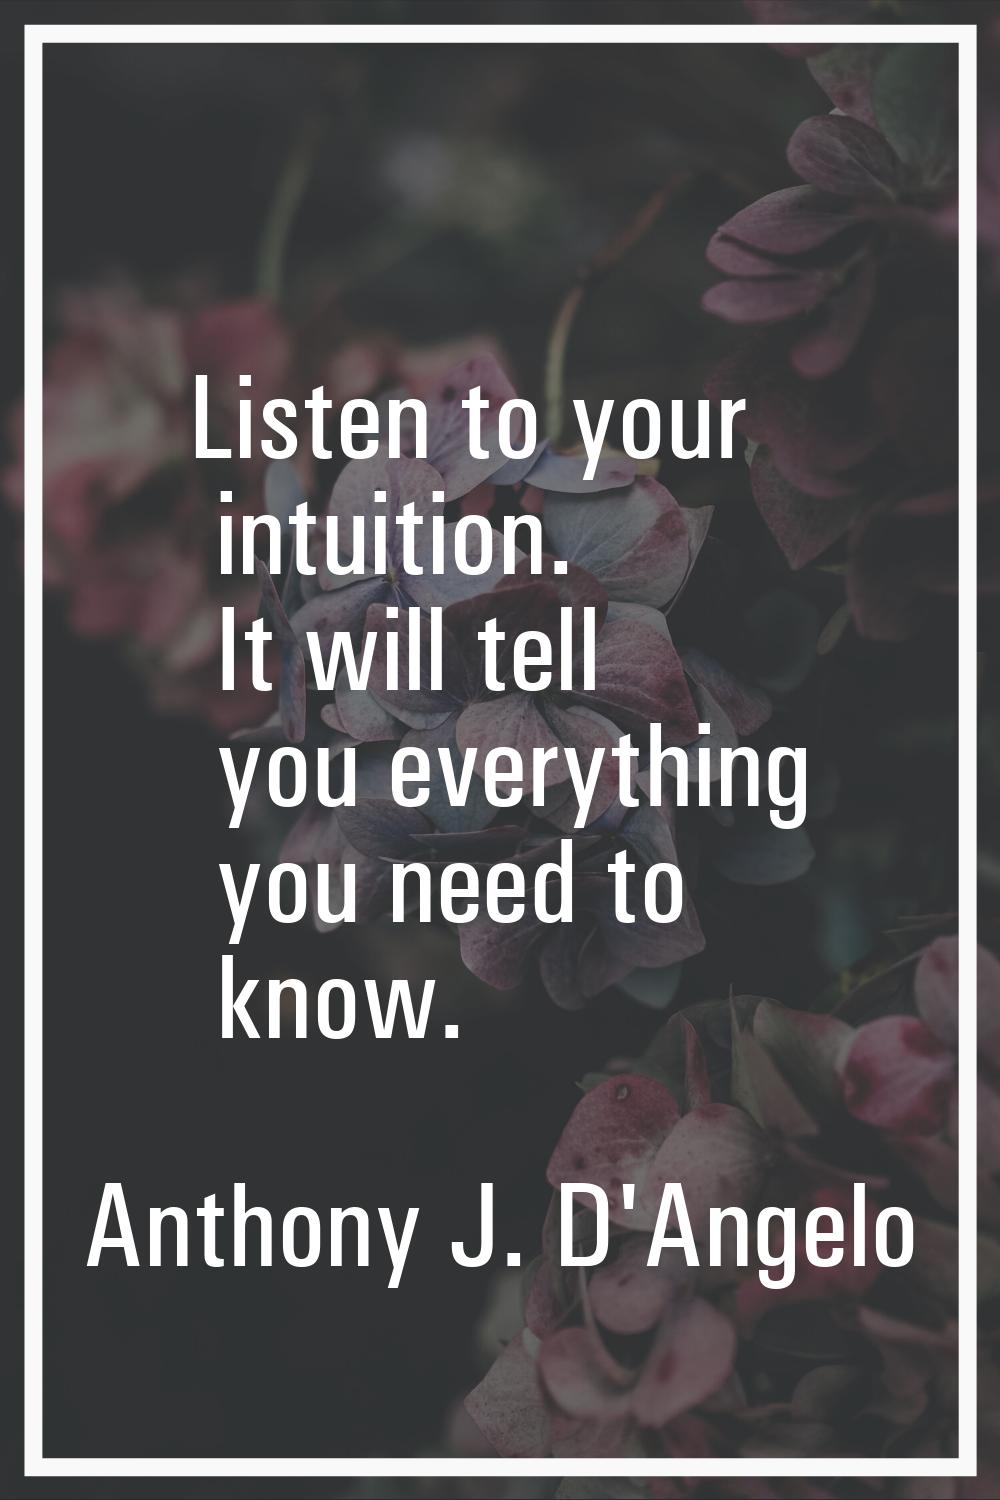 Listen to your intuition. It will tell you everything you need to know.